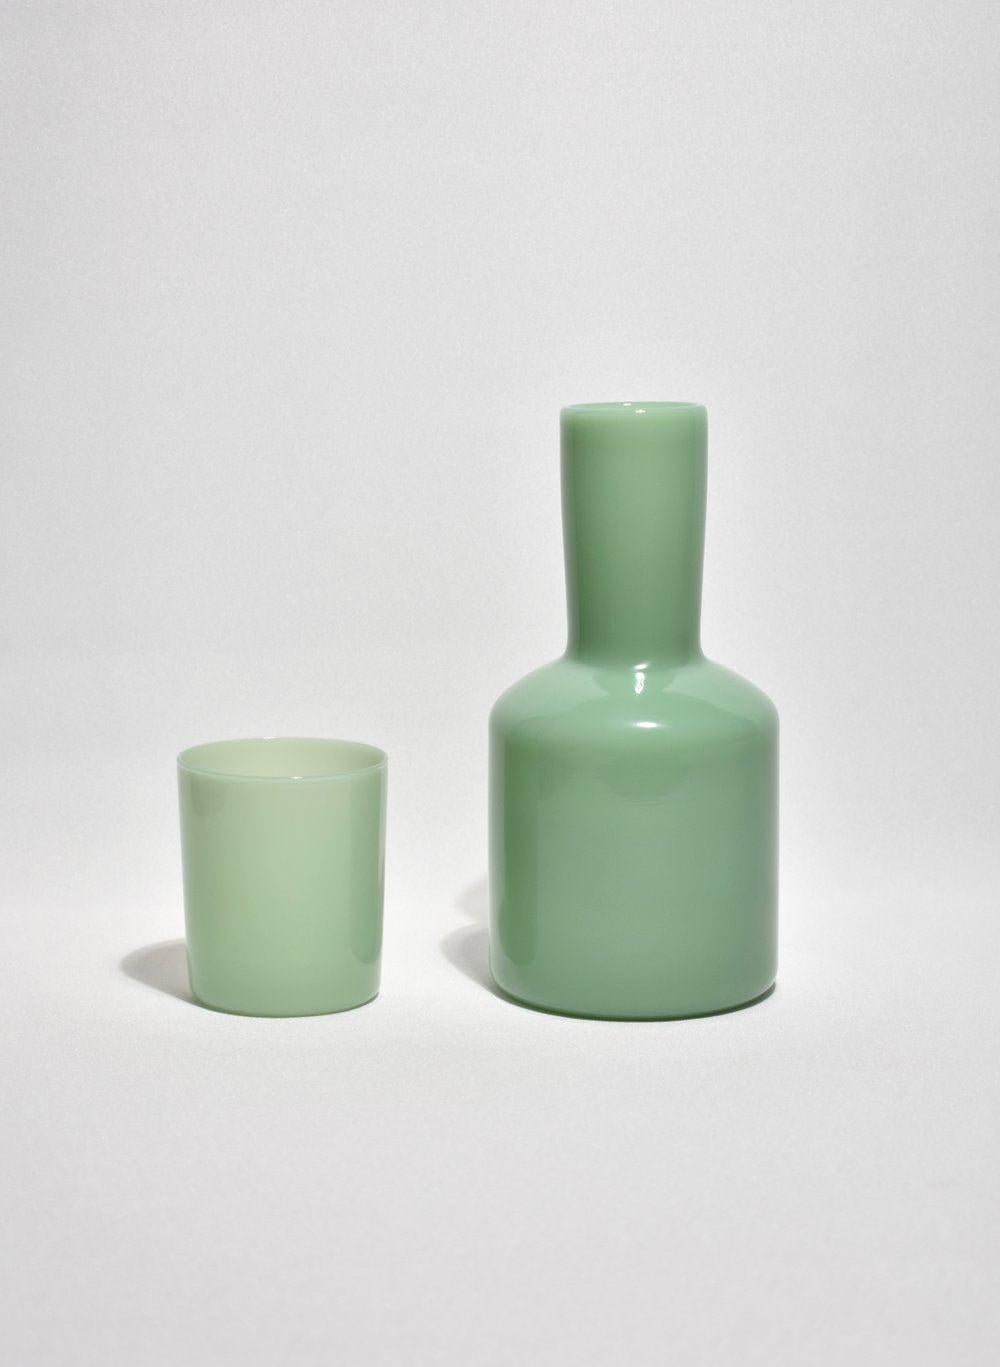 Opaque mint carafe set by Maison Balzac inspired by the traditional sets used in France and displayed on a bedside table at night. 

Food grade colored glass, individually mouth blown. 
Heat and cold resistant.
Hand wash